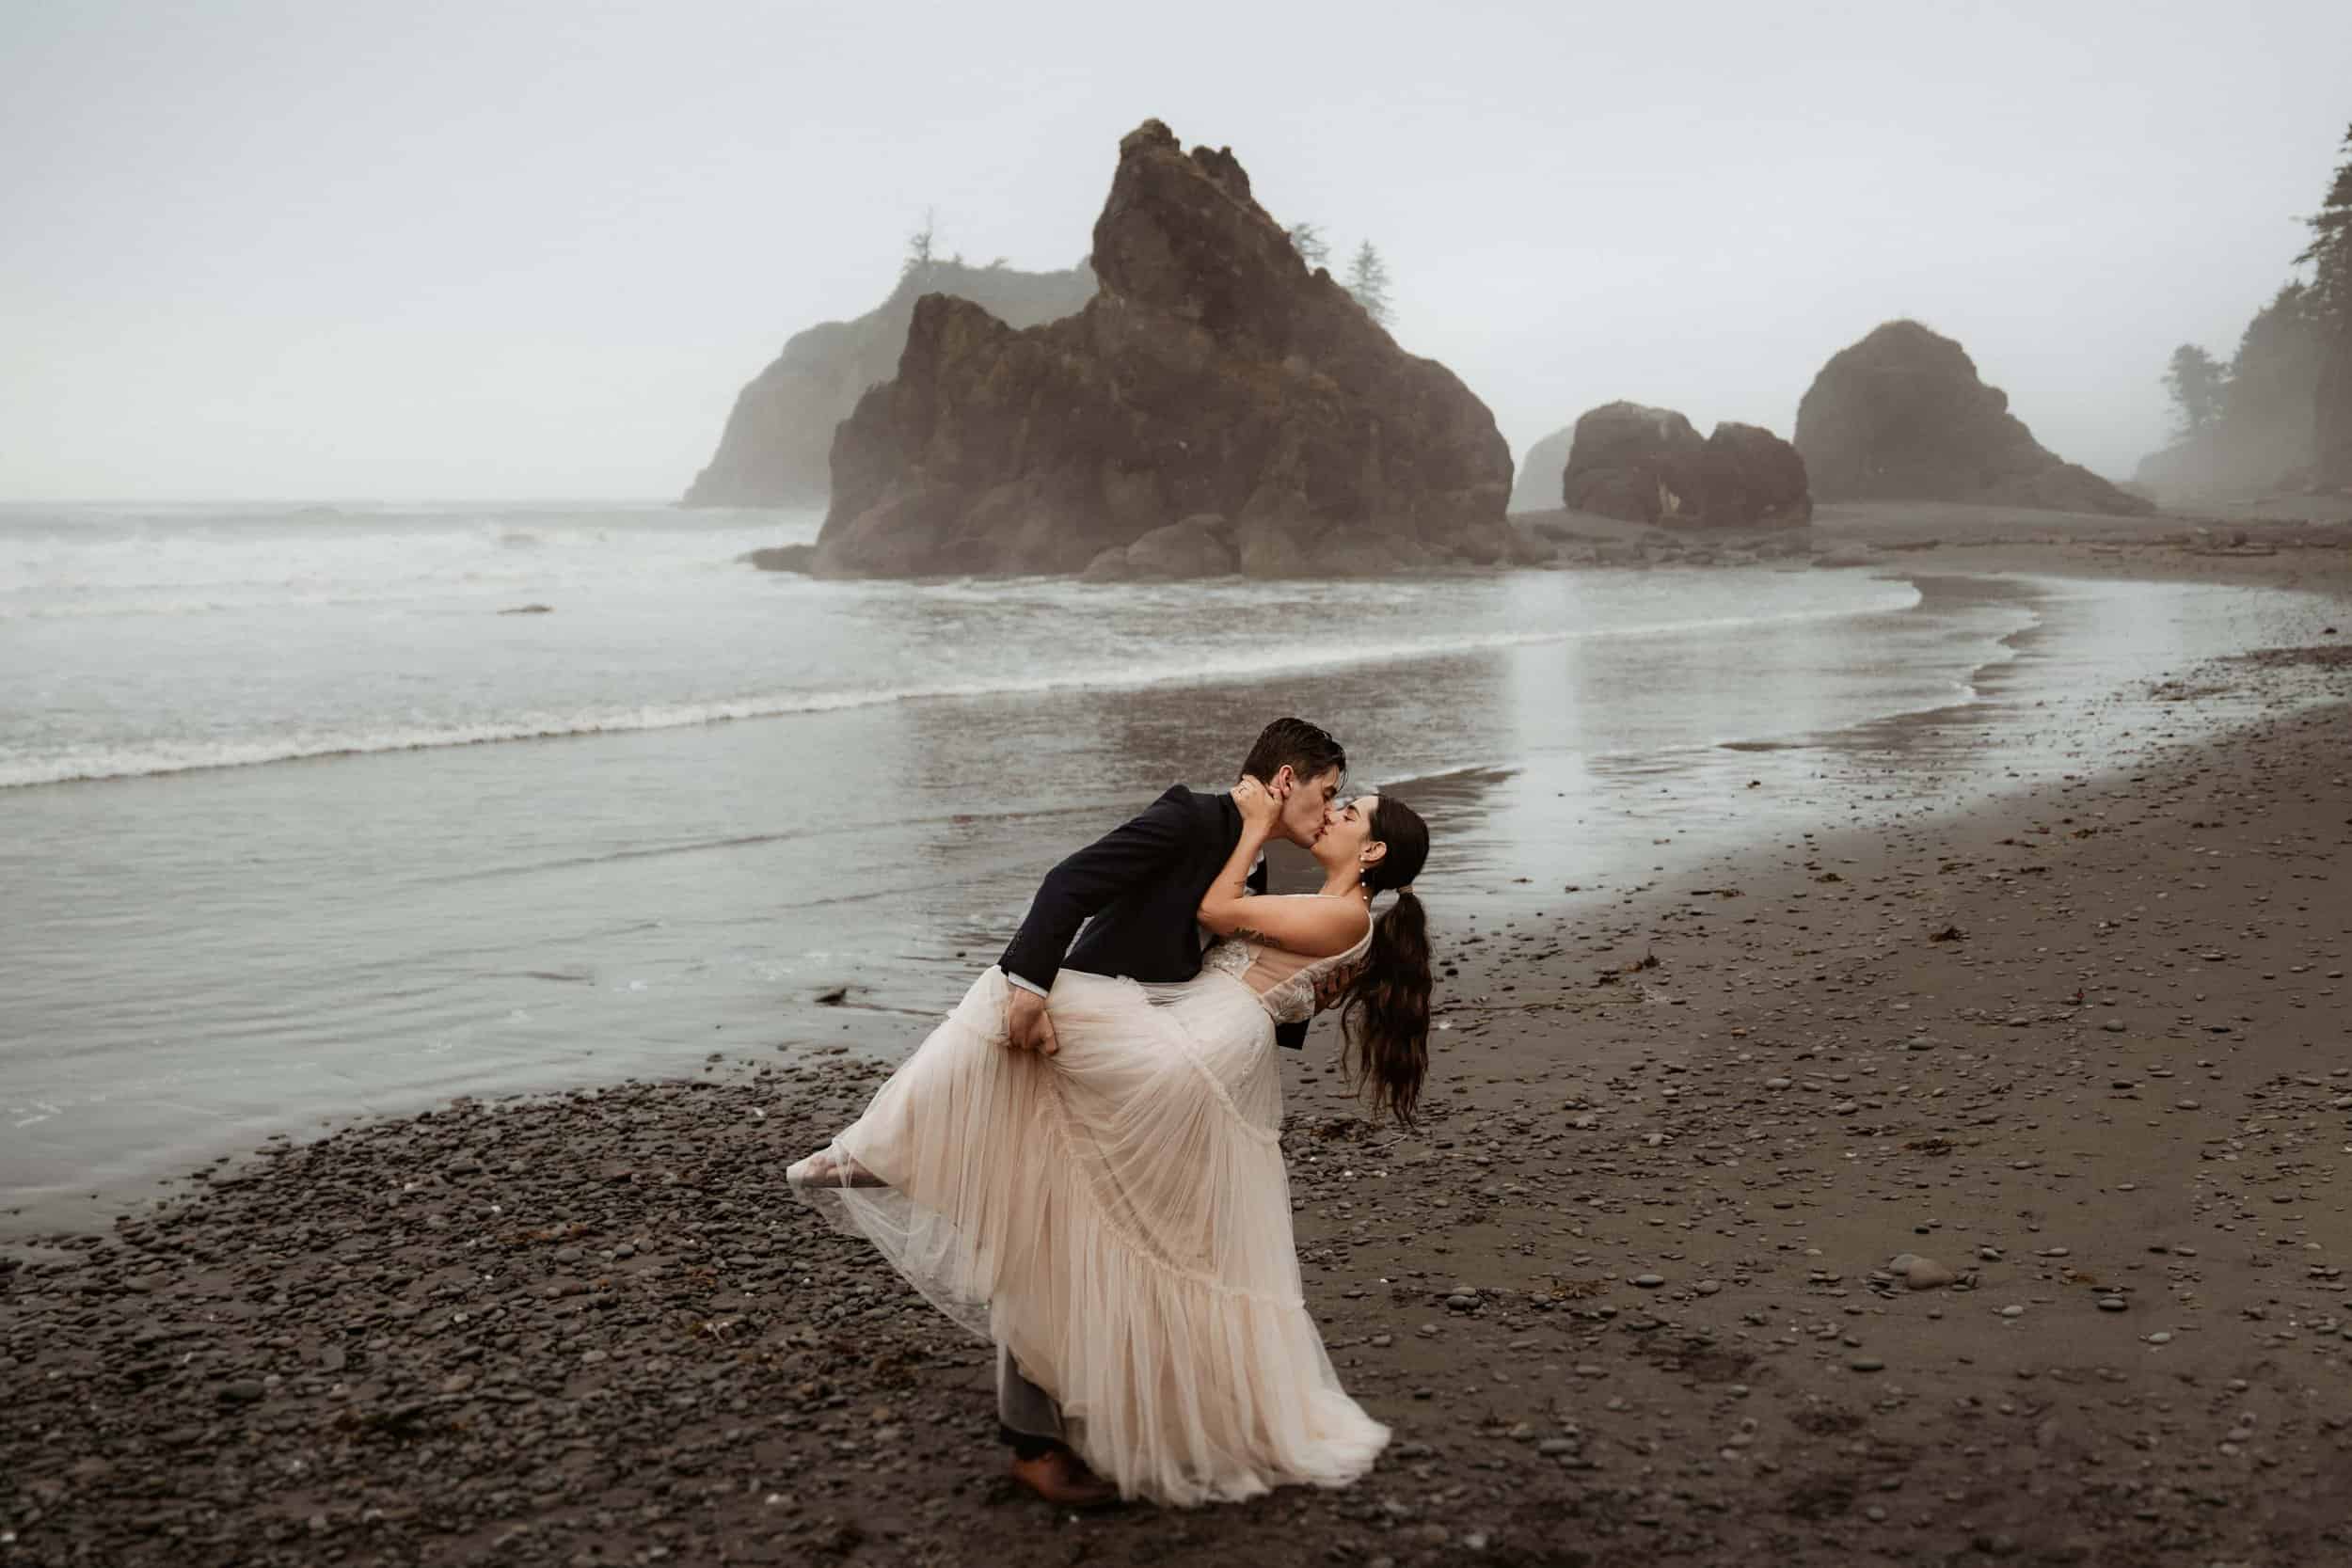 Top places to elope in the US near the coast